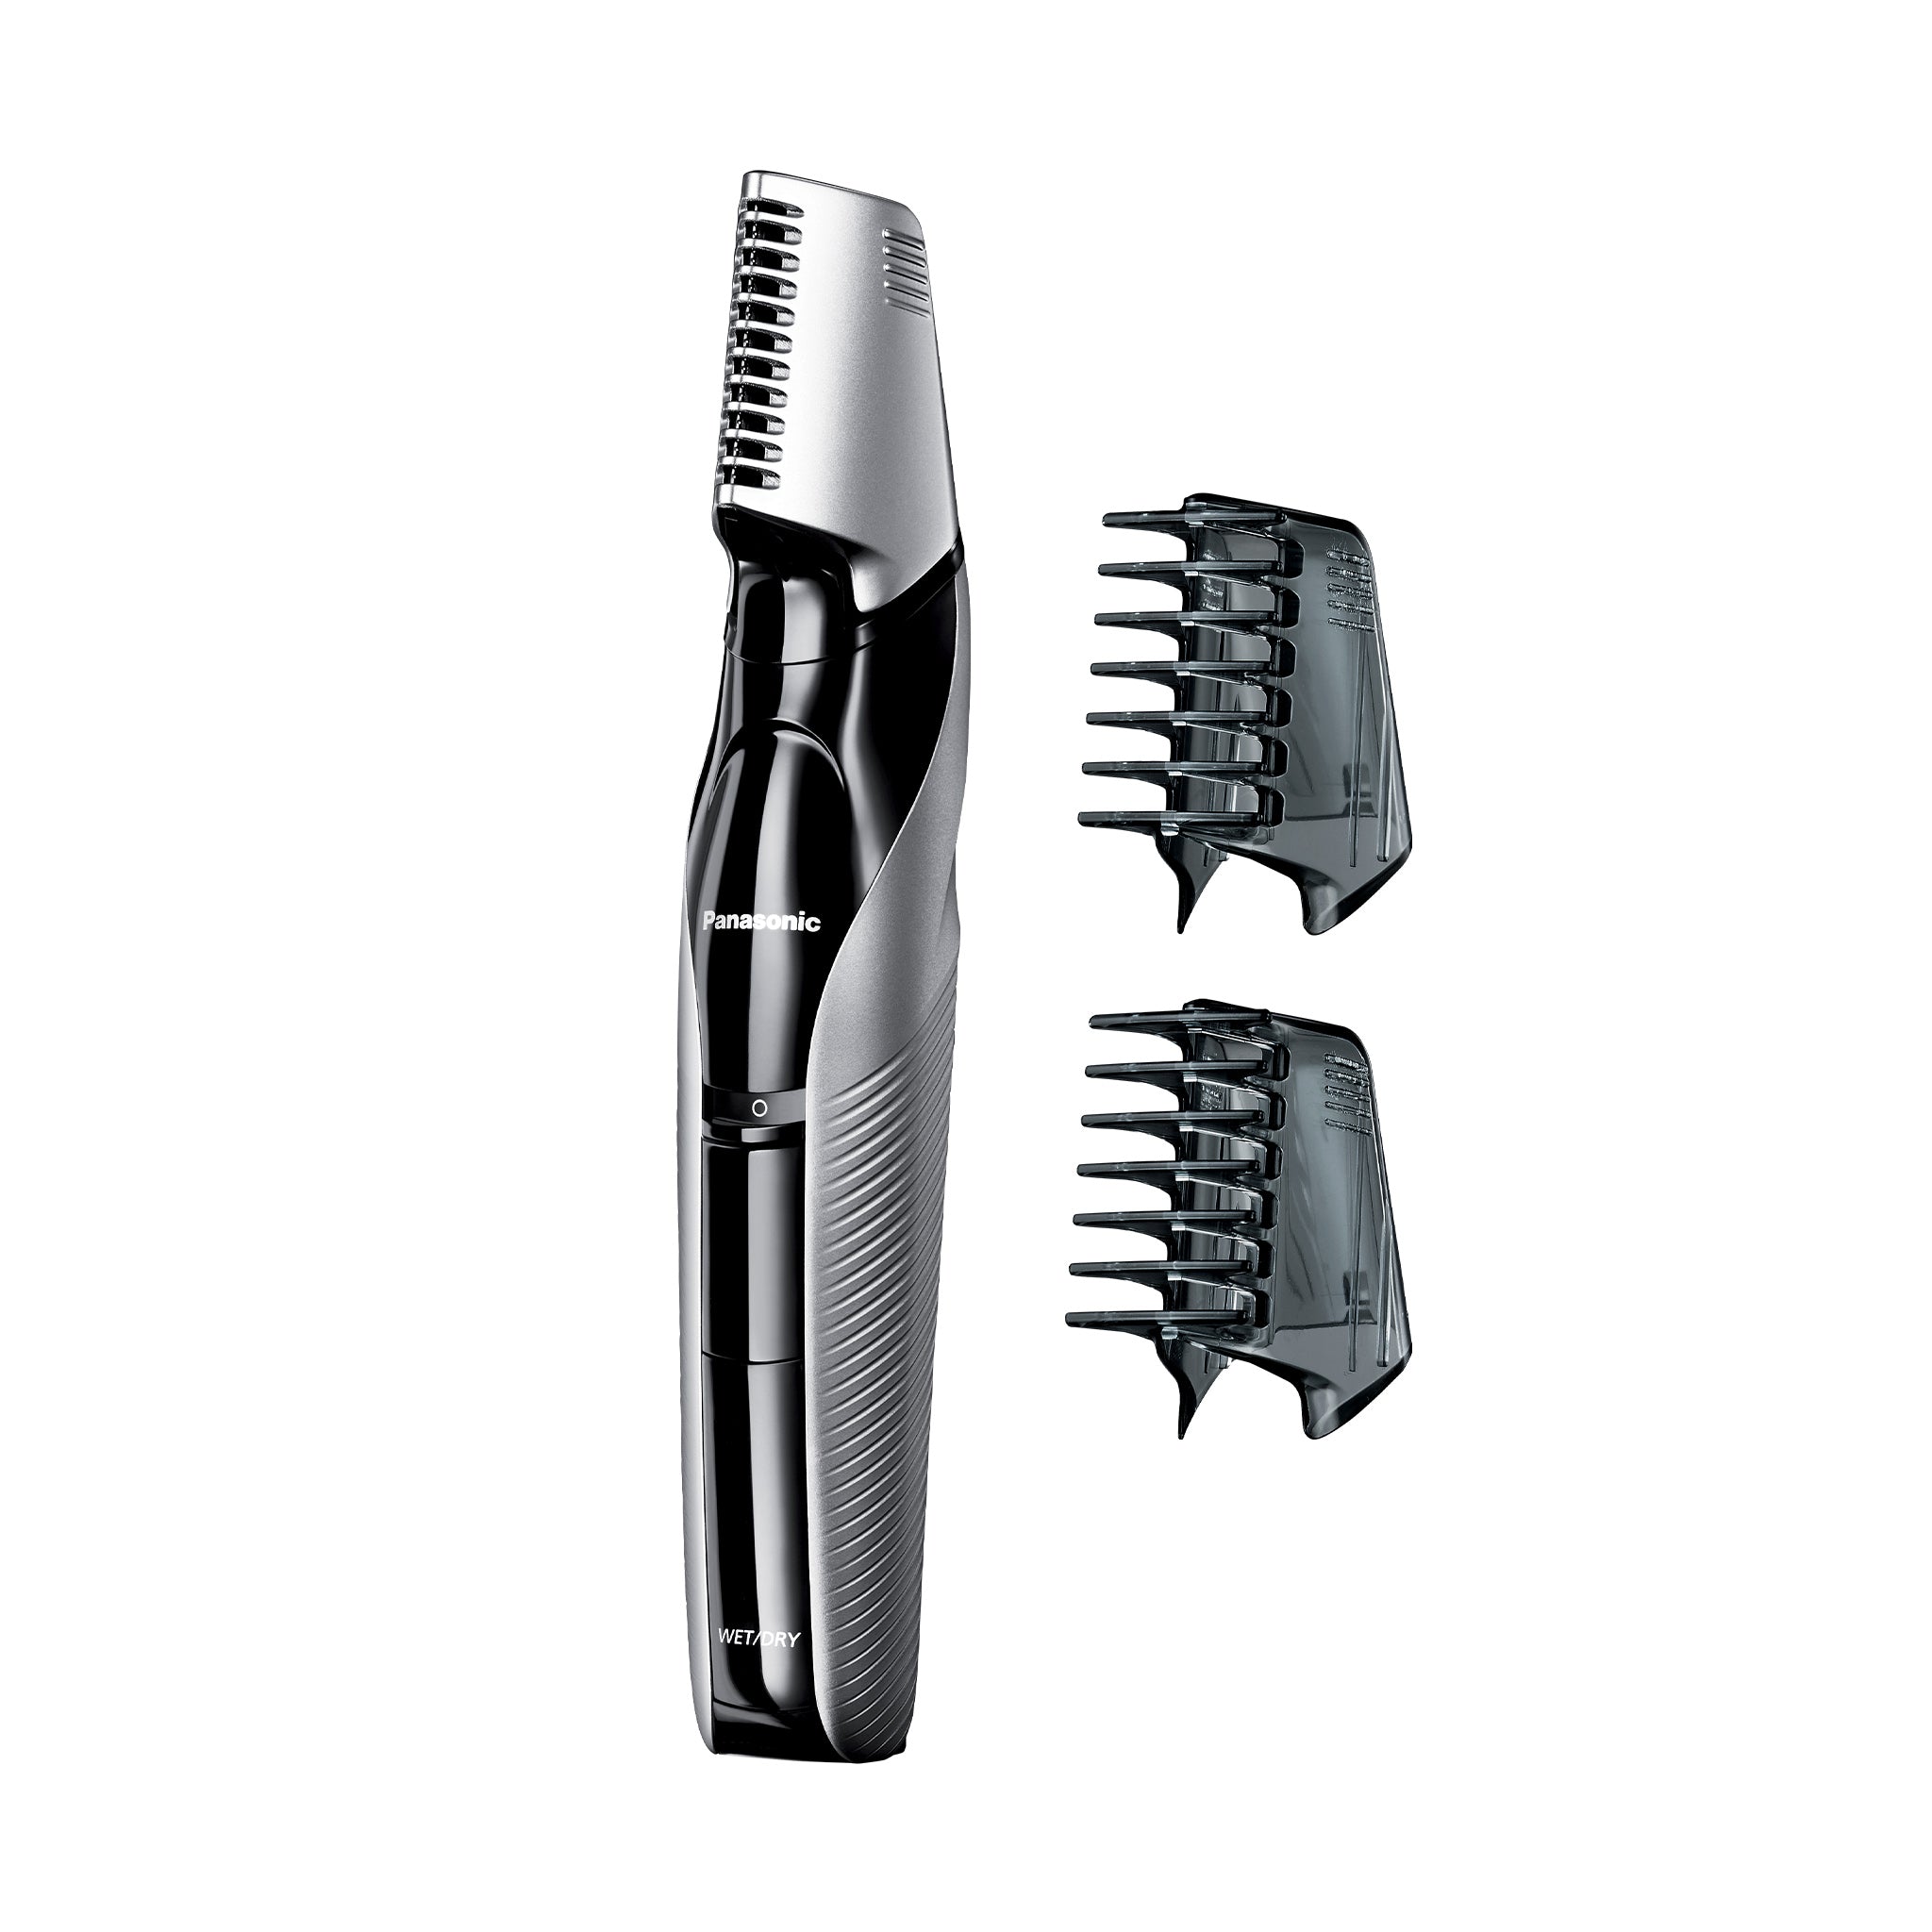 Panasonic Body Hair Groomer with - 3 Attachments Comb ER-GK60-S